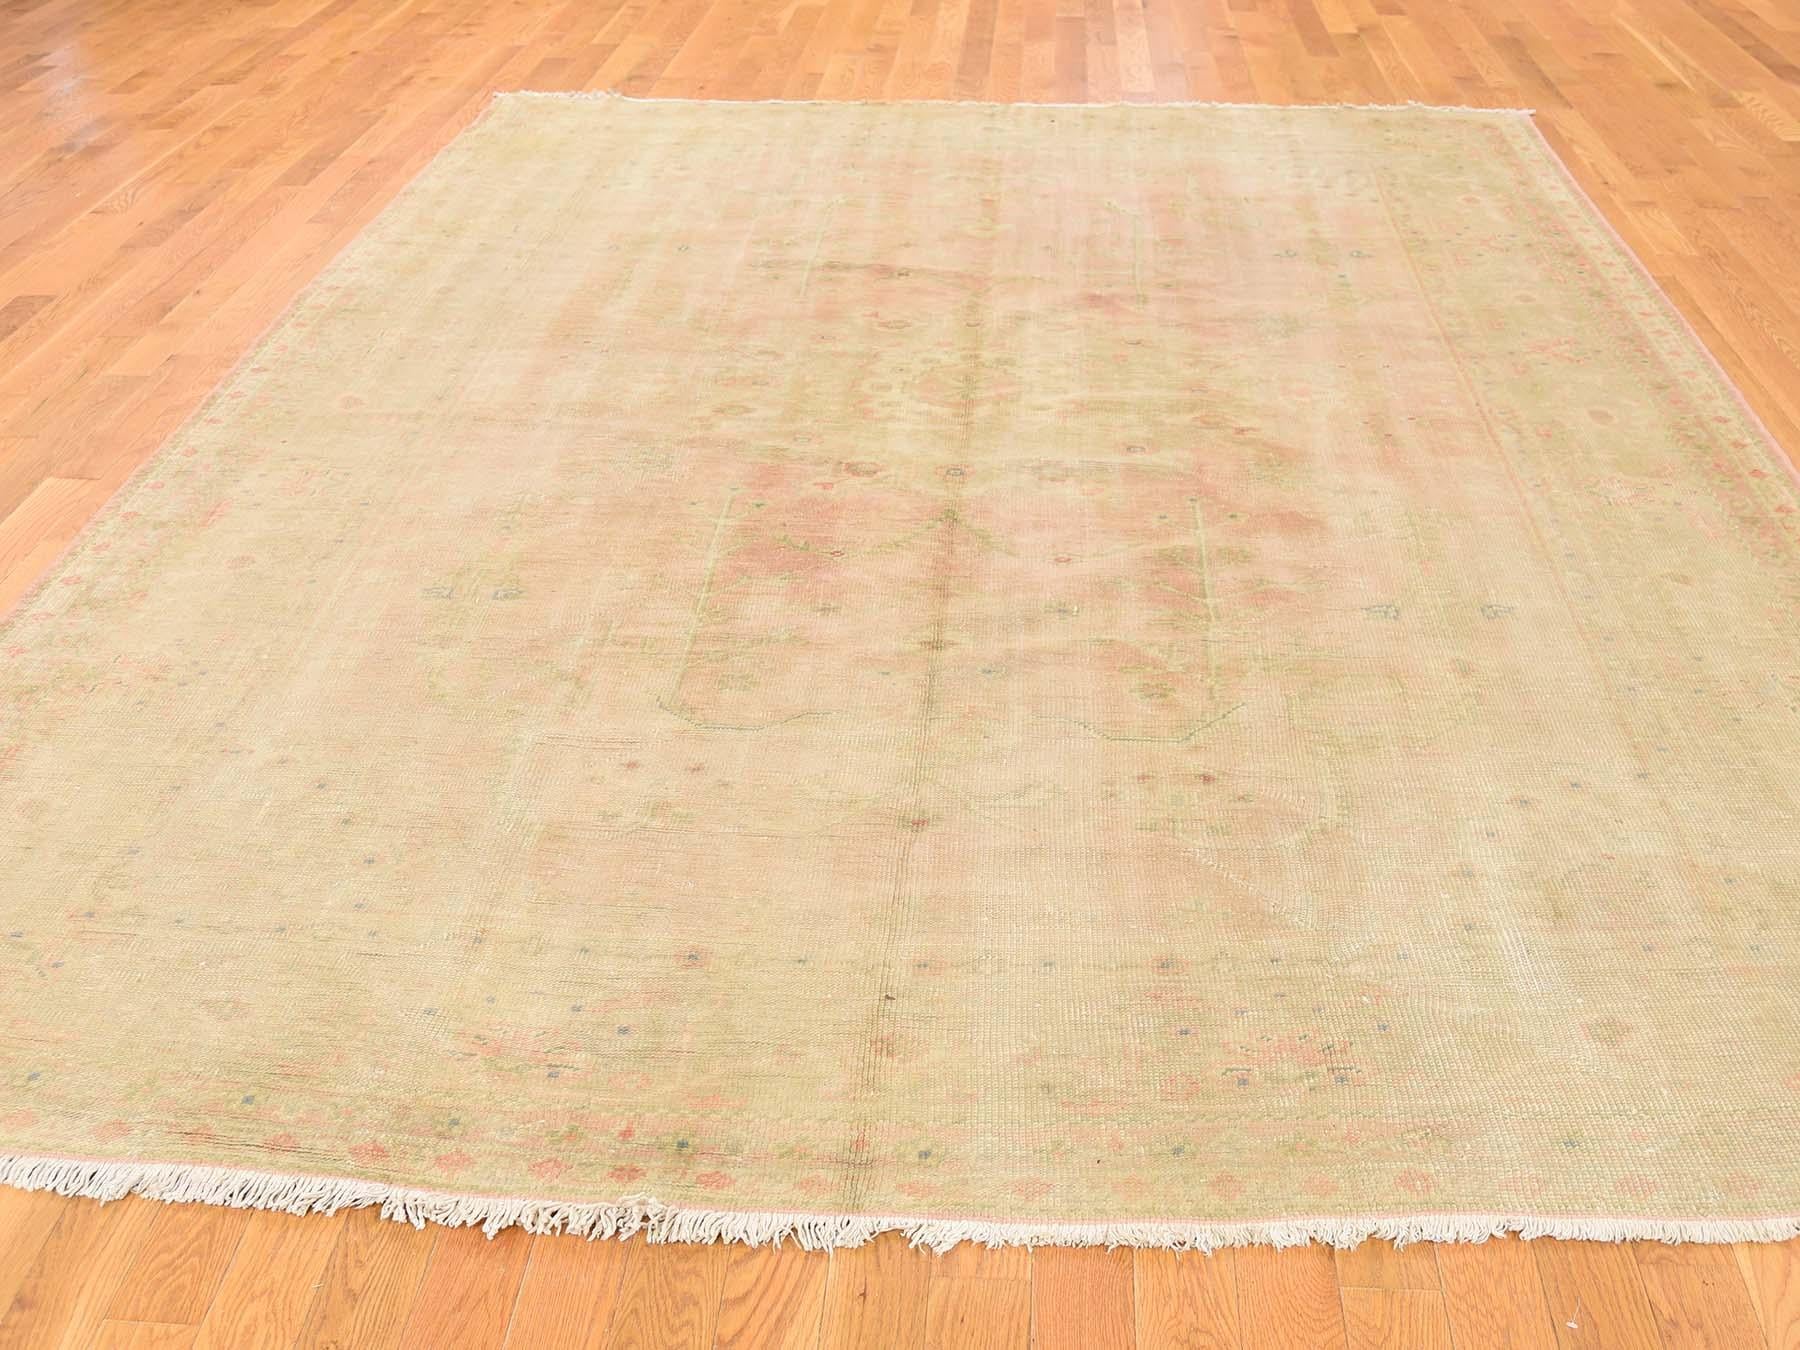 This is a genuine hand knotted oriental rug. It is not hand tufted or machine made rug. Our entire inventory is made of either hand knotted or handwoven rugs.

Revive your home style with this beautiful hand knotted carpet. This handcrafted antique